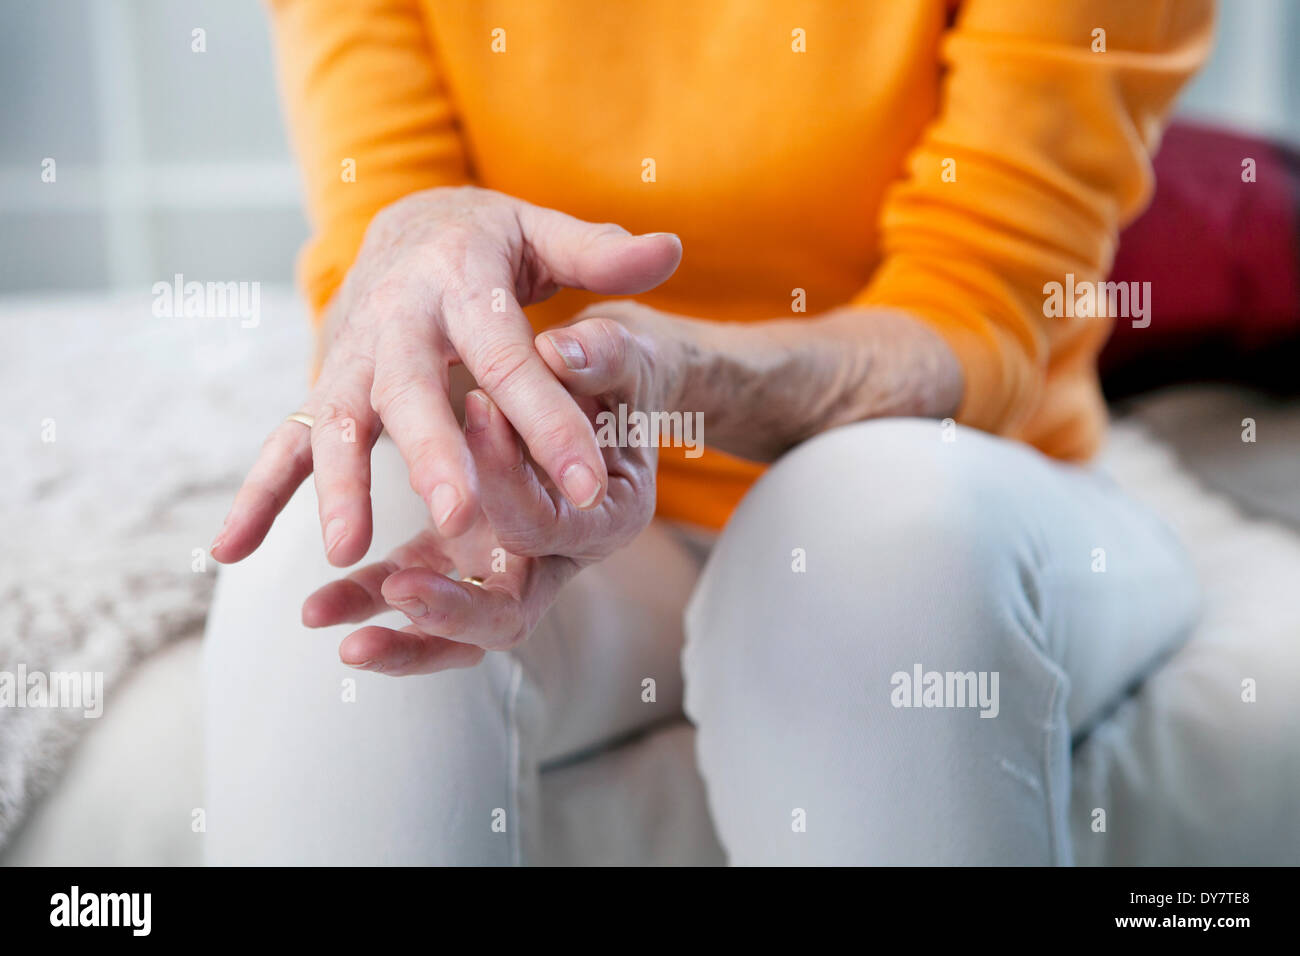 Elderly person with painful hand Stock Photo